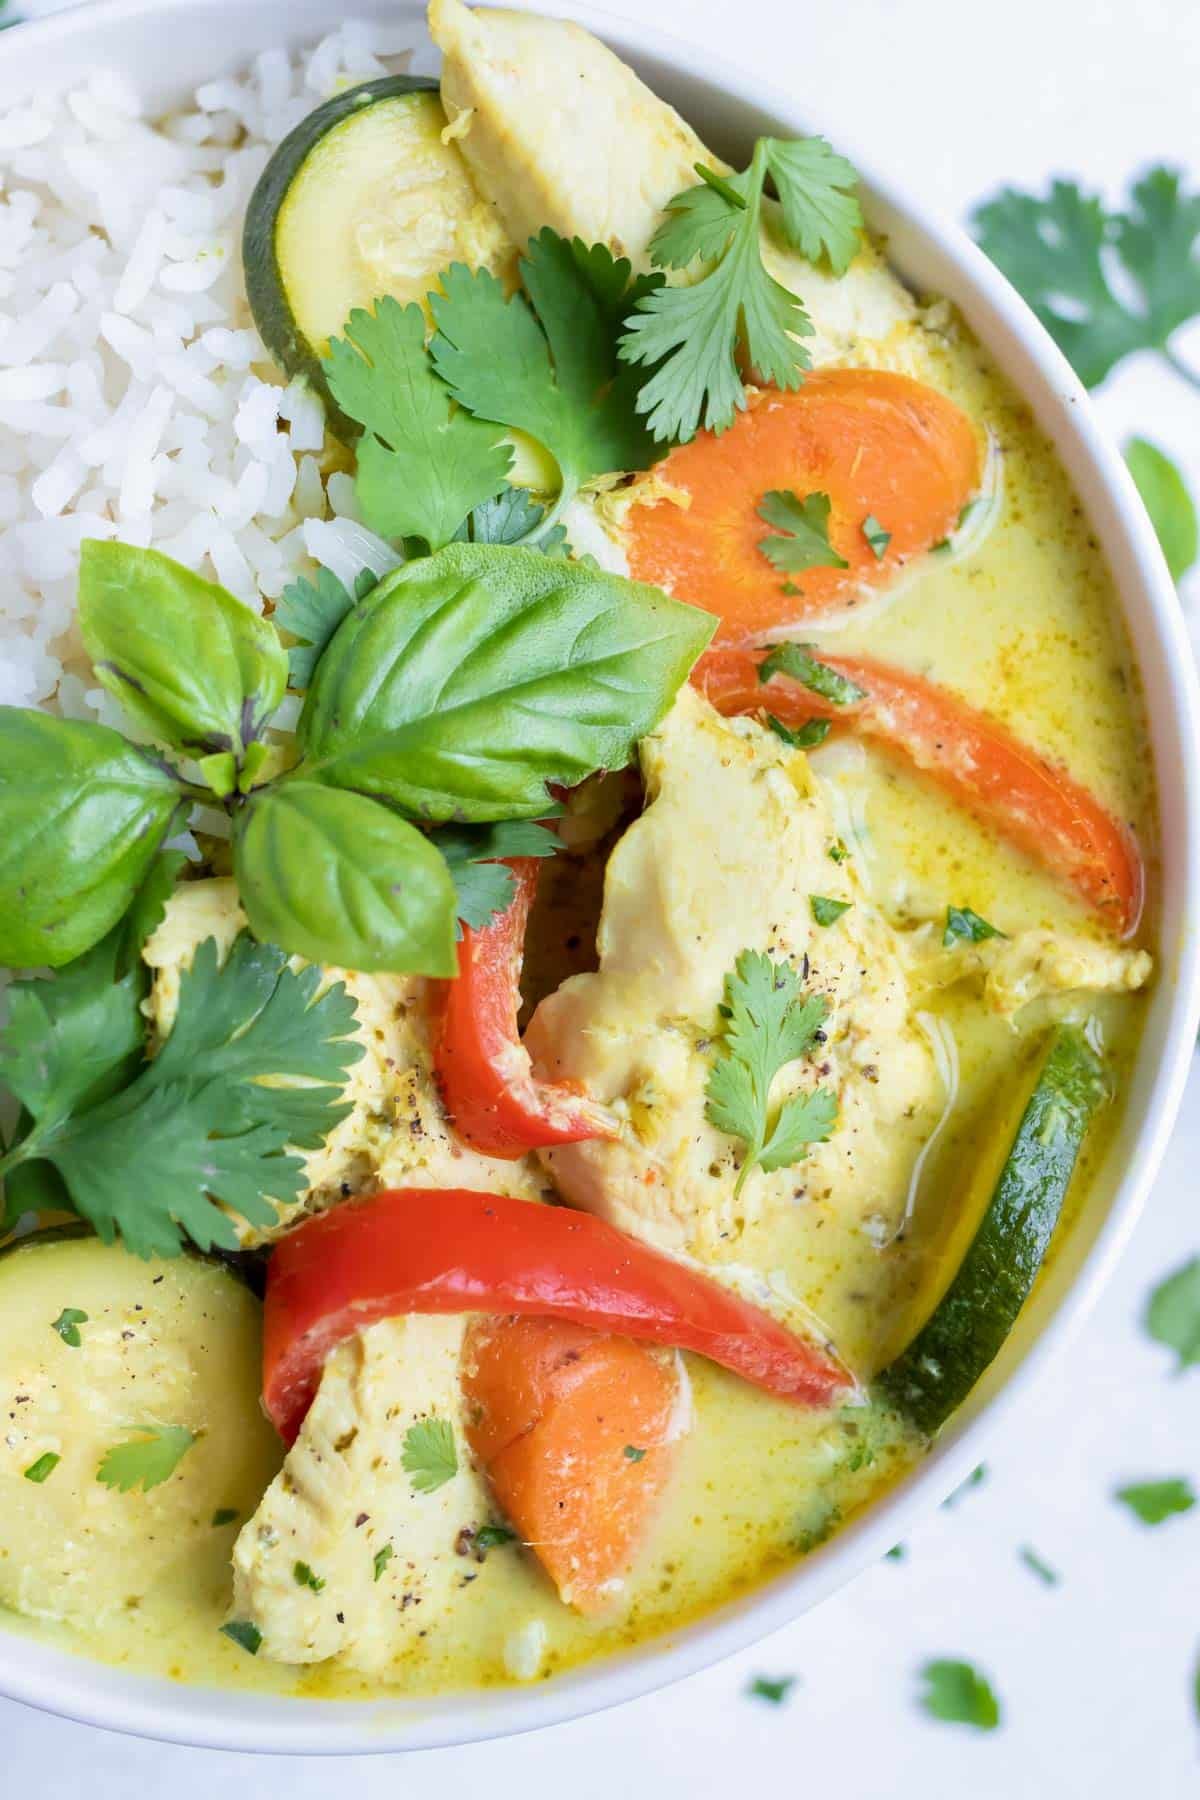 Thai green chicken curry is a quick and easy meal served with rice.